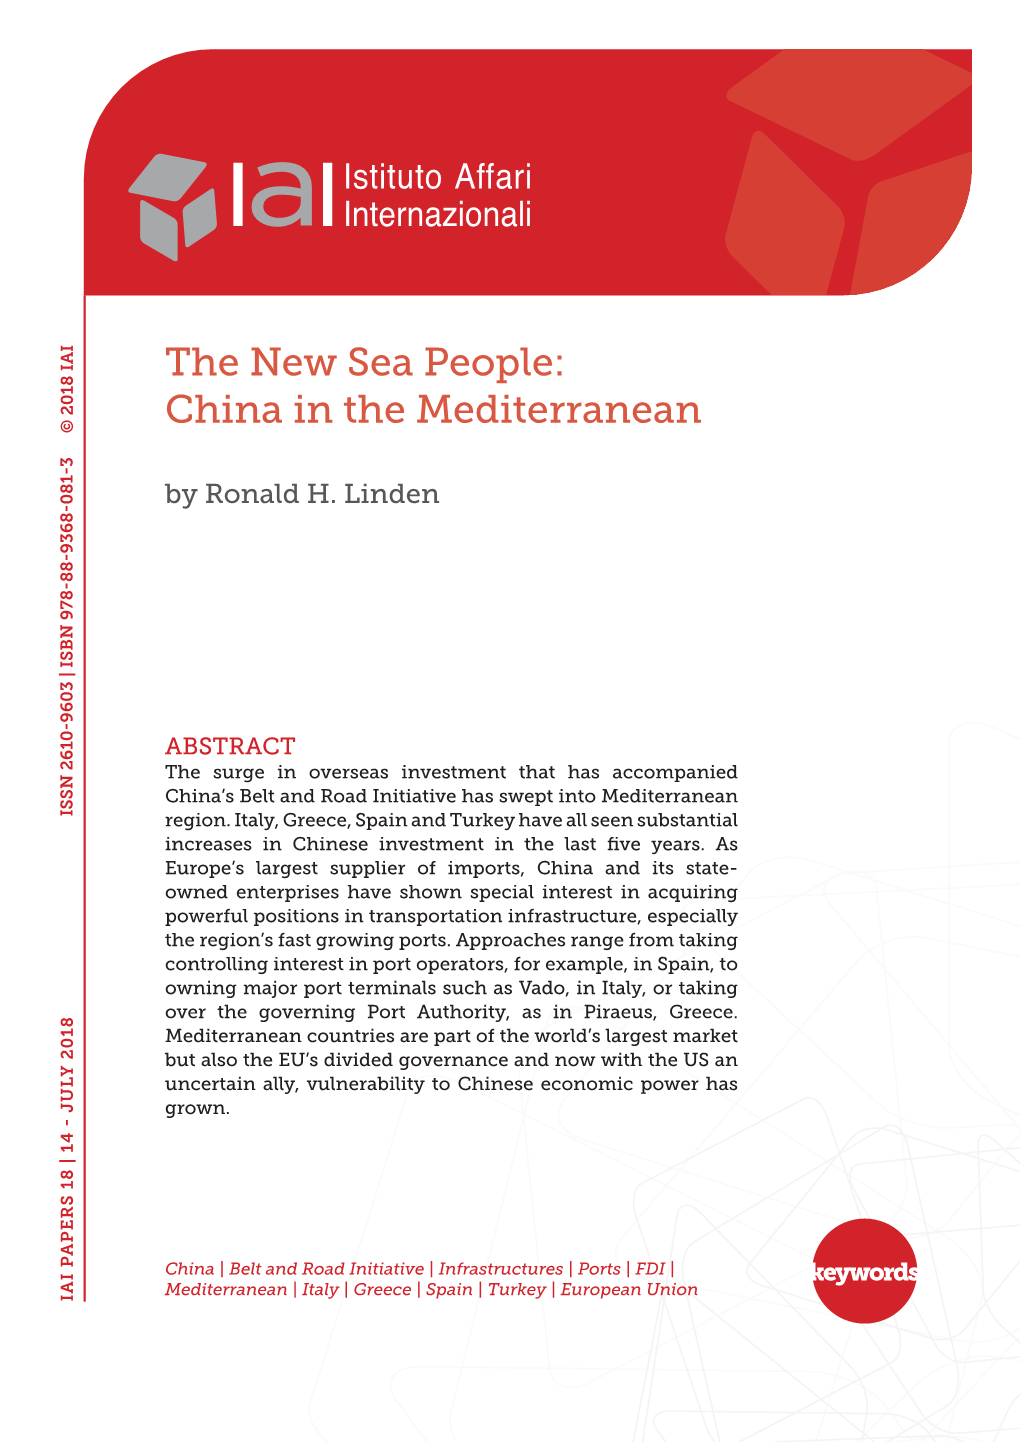 The New Sea People: China in the Mediterranean